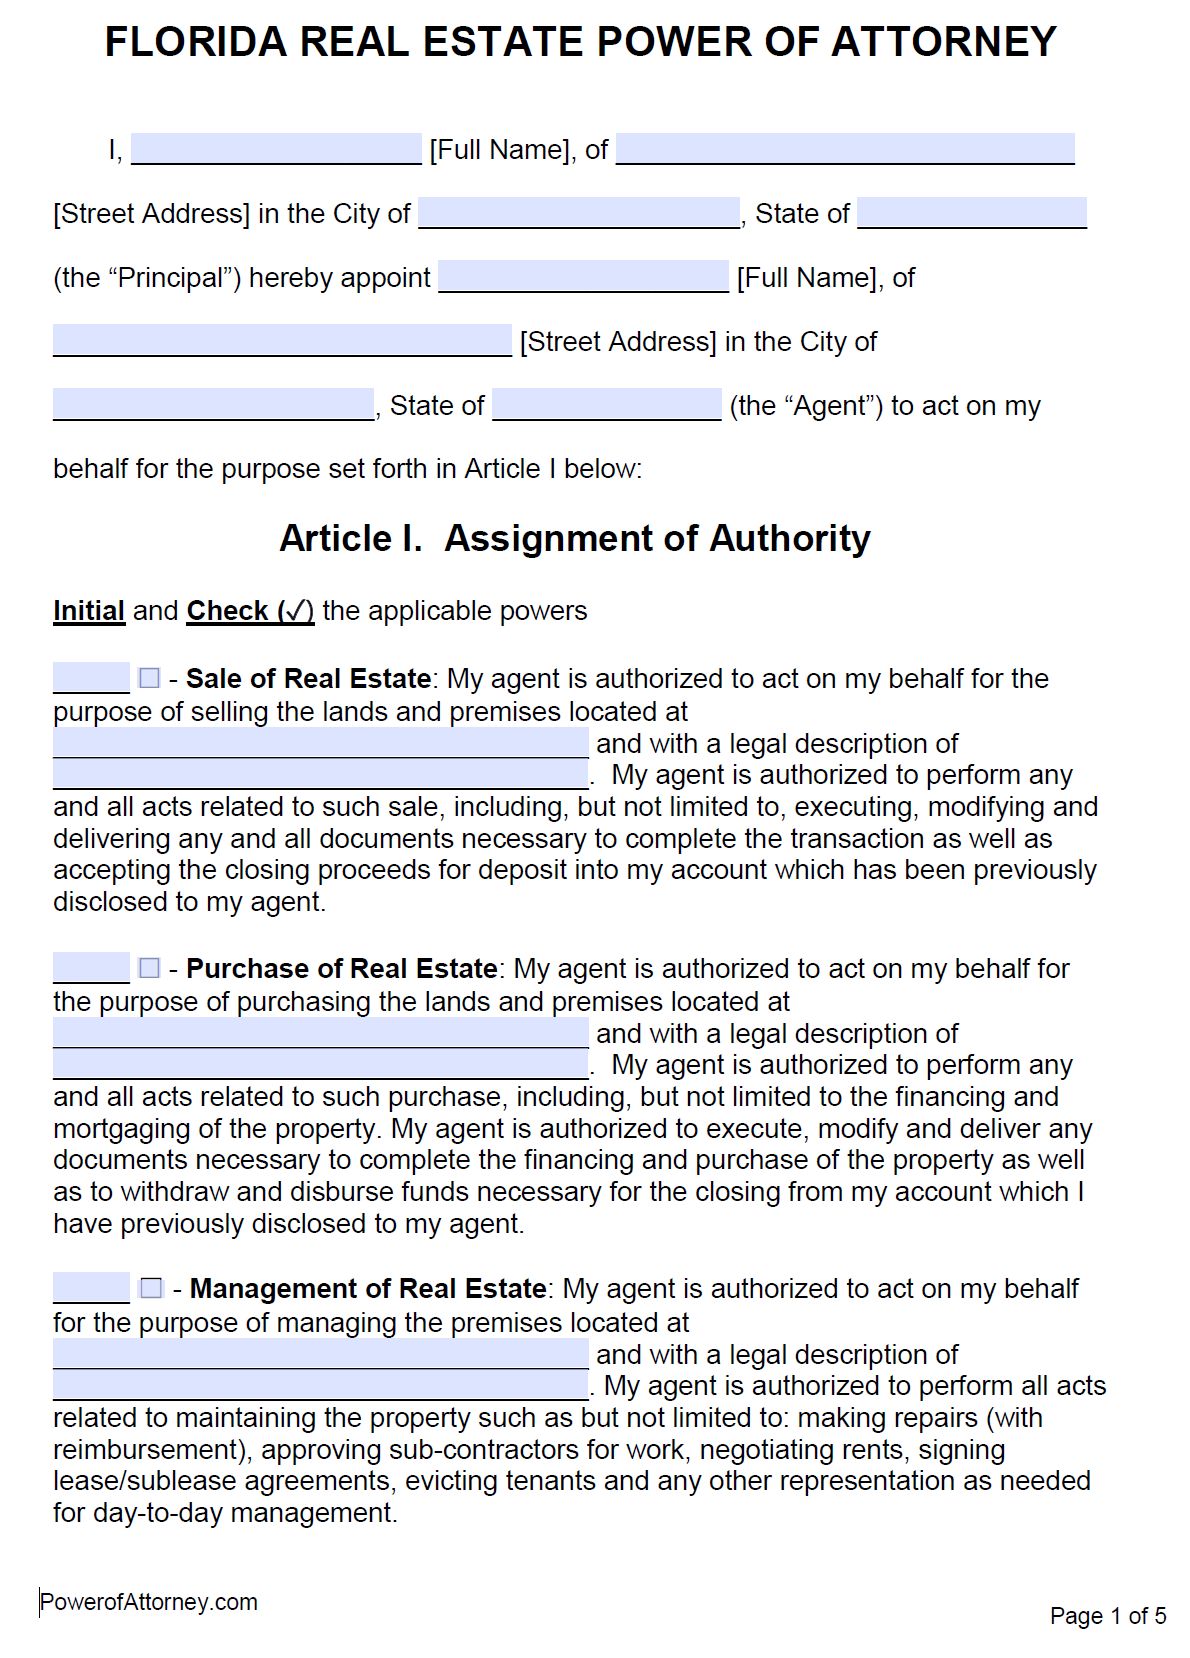 Free Real Estate Power of Attorney Florida Form - PDF - Word